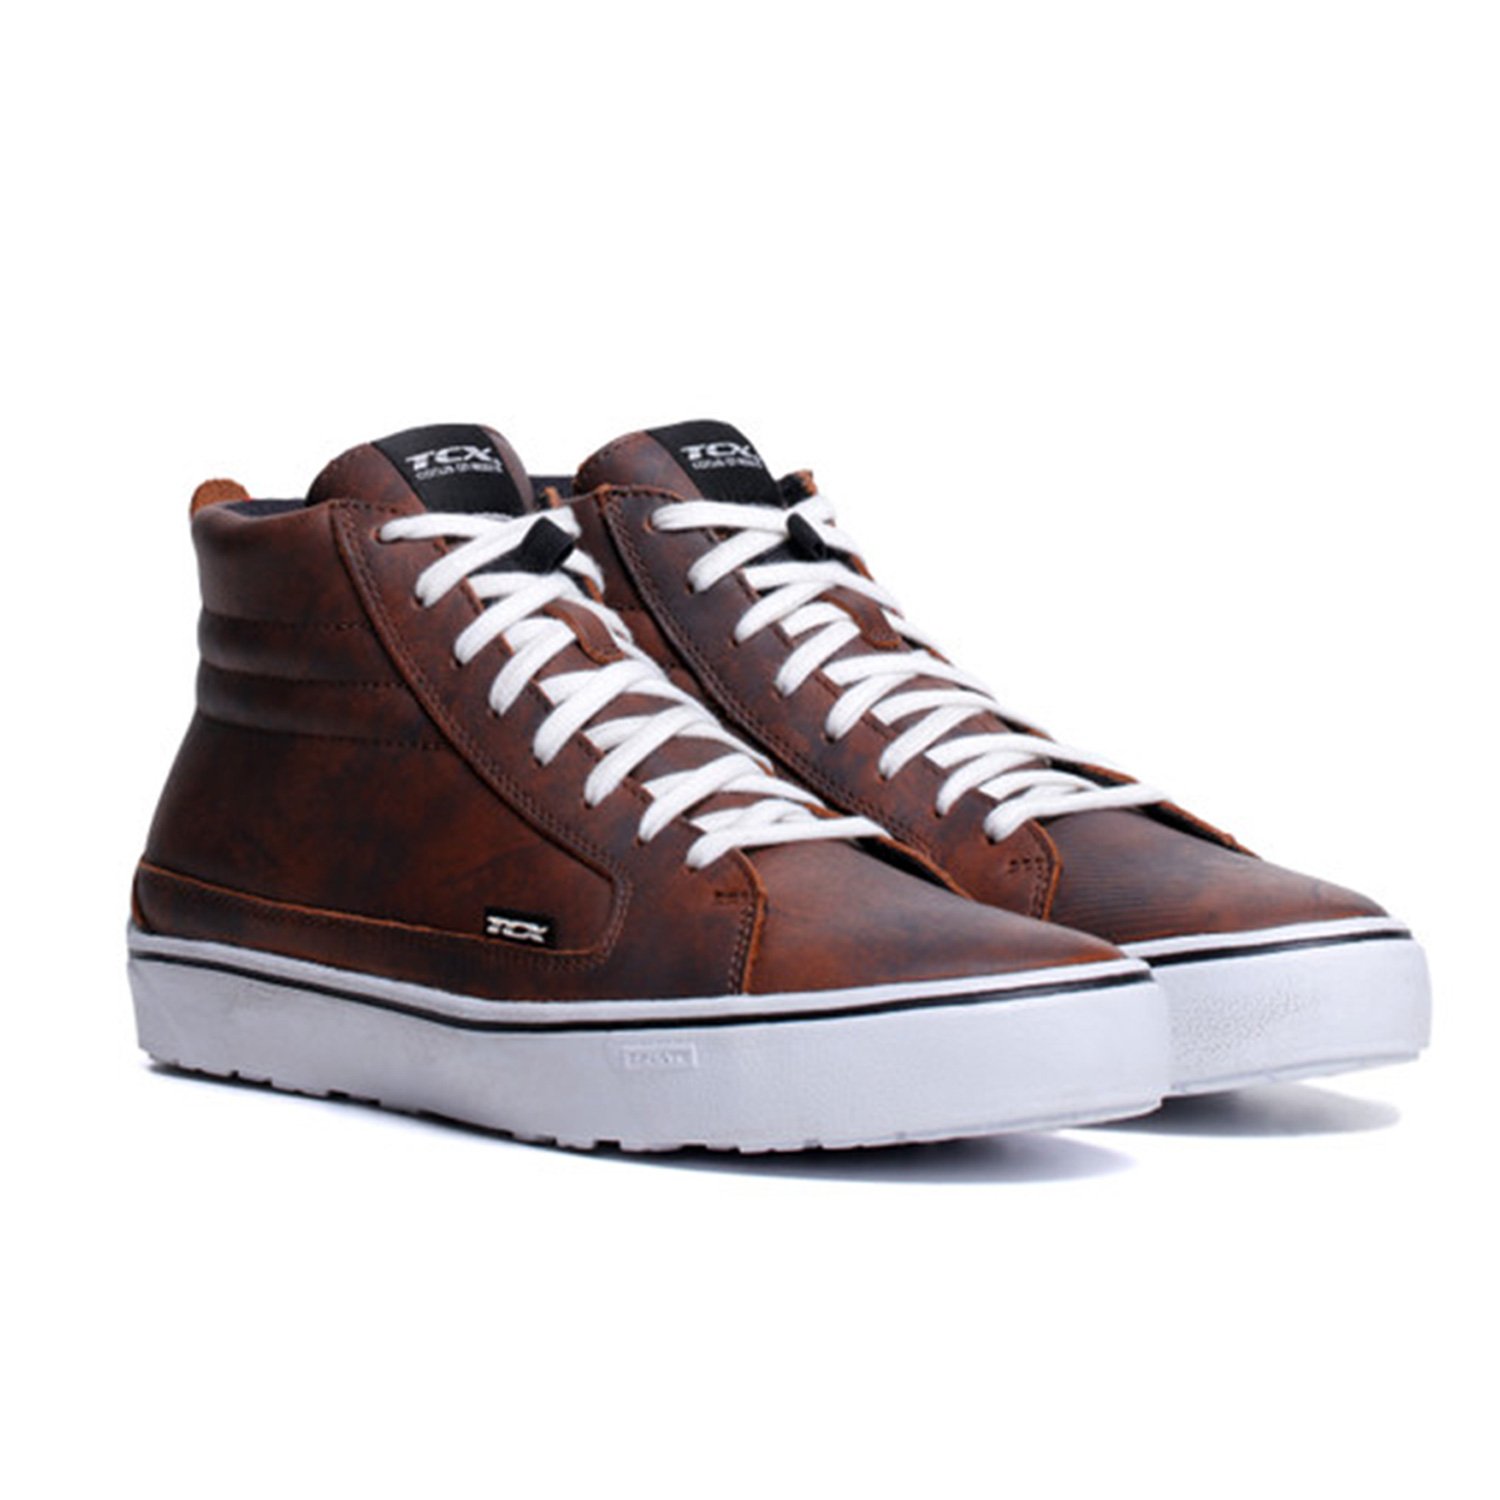 Image of TCX Street 3 WP Marron Blanc Chaussures Taille 48